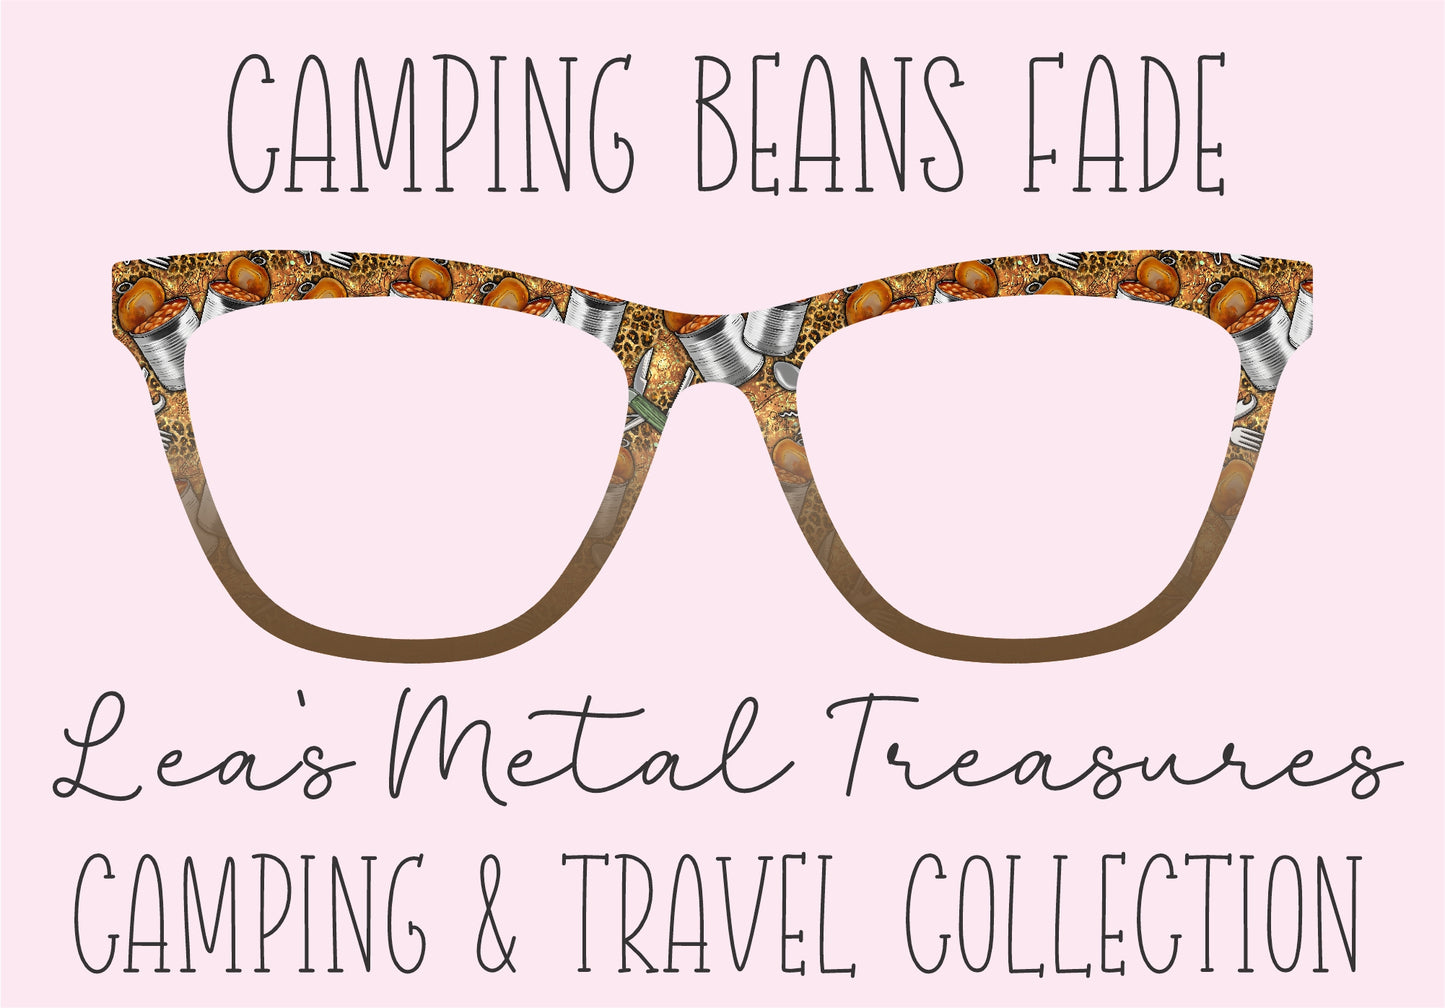 CAMPING BEANS FADE Eyewear Frame Toppers COMES WITH MAGNETS